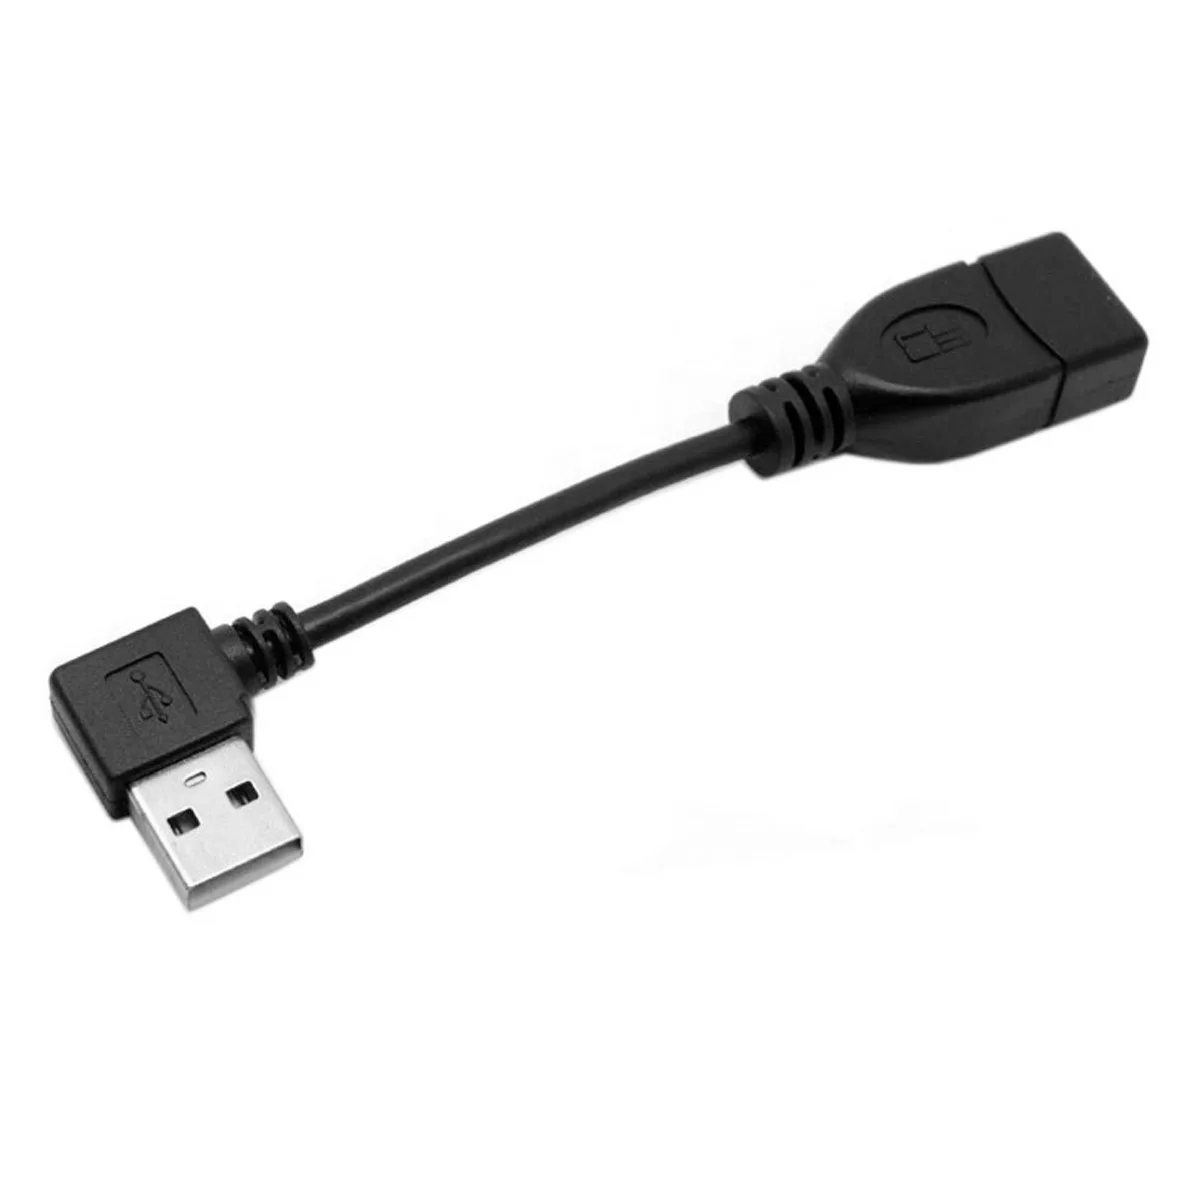 

Xiwai 10cm 20cm 40cm USB 2.0 A Type 90 Degree Left Angled 480M Male to Female Extension Cable Black